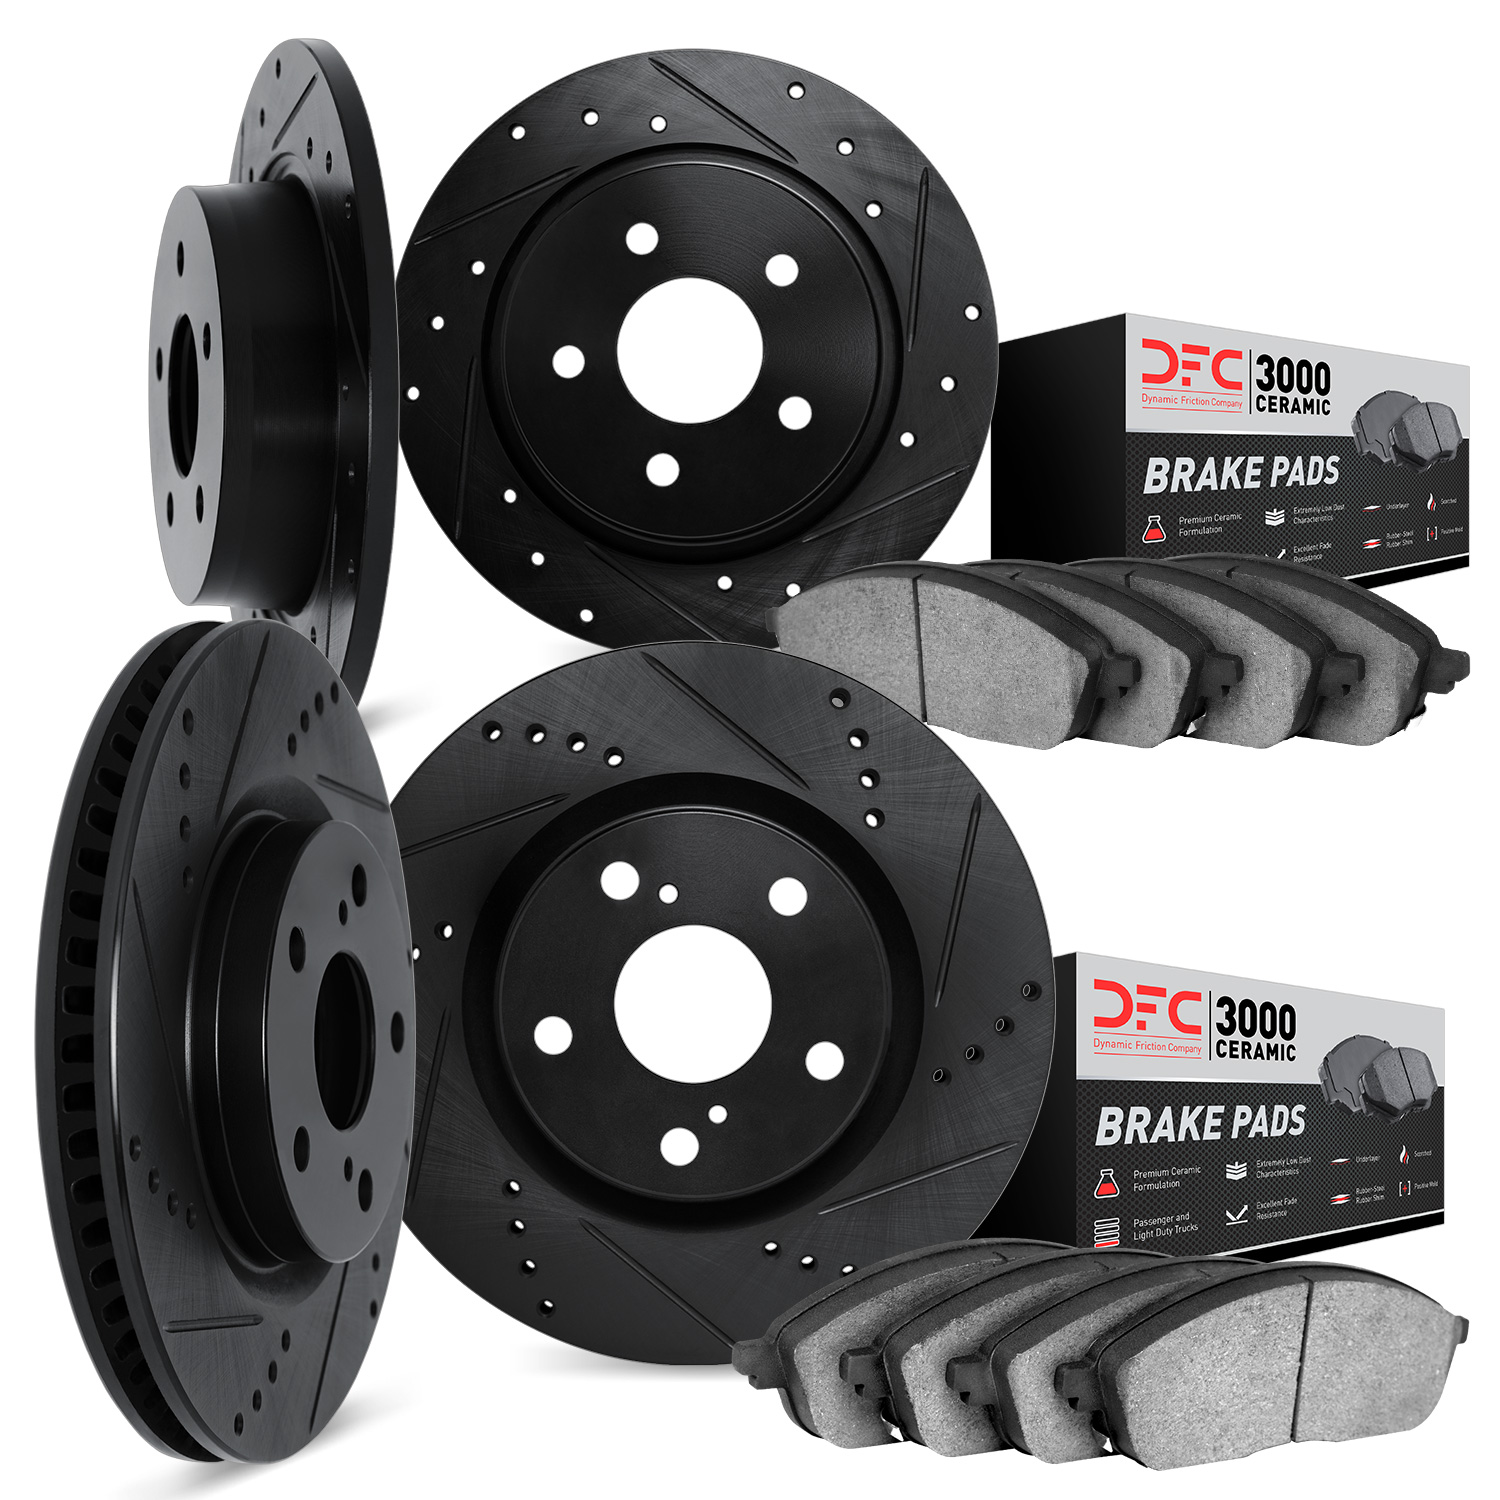 8304-13005 Drilled/Slotted Brake Rotors with 3000-Series Ceramic Brake Pads Kit [Black], 1990-1996 Subaru, Position: Front and R